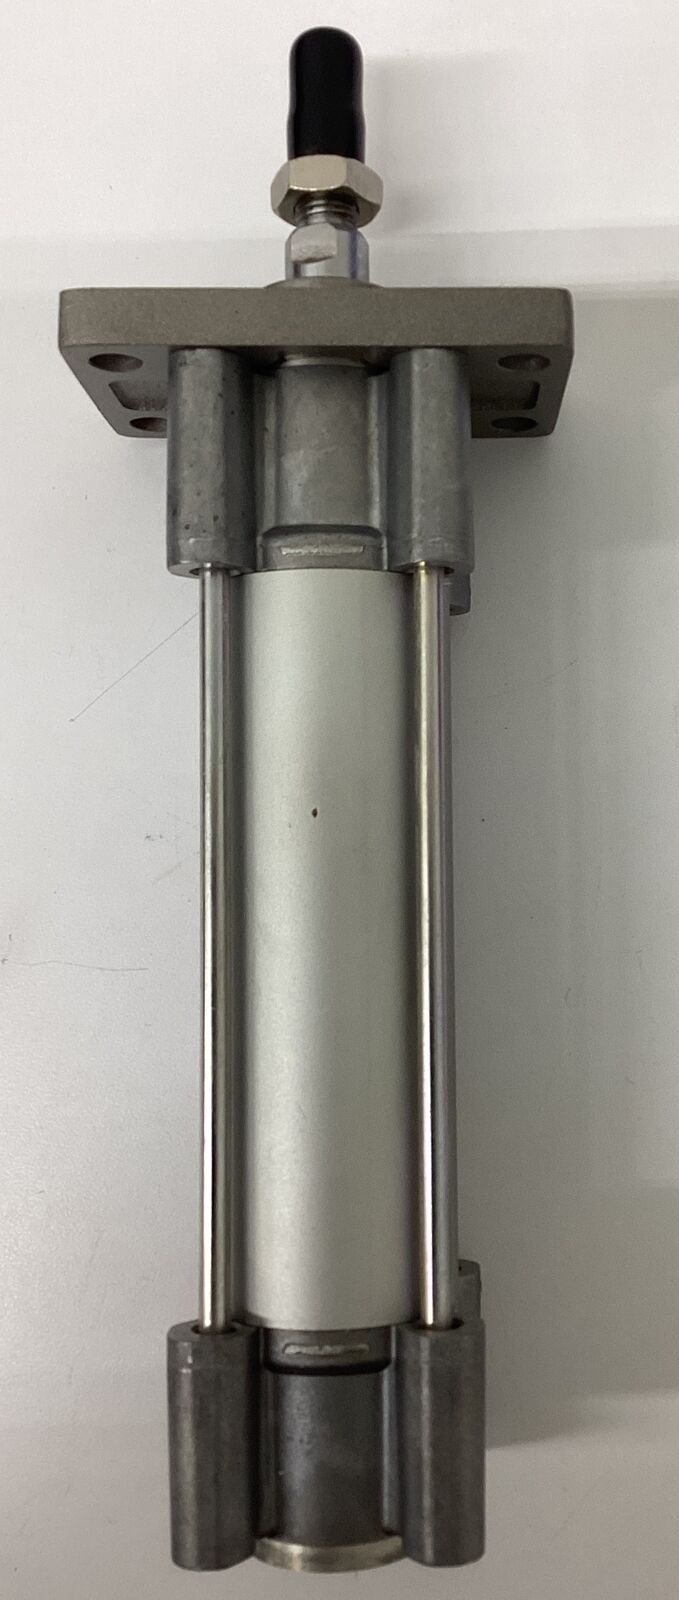 SMC C96SF40-100 Pneumatic Cylinder  40mm Bore 100mm Stroke (CL378)